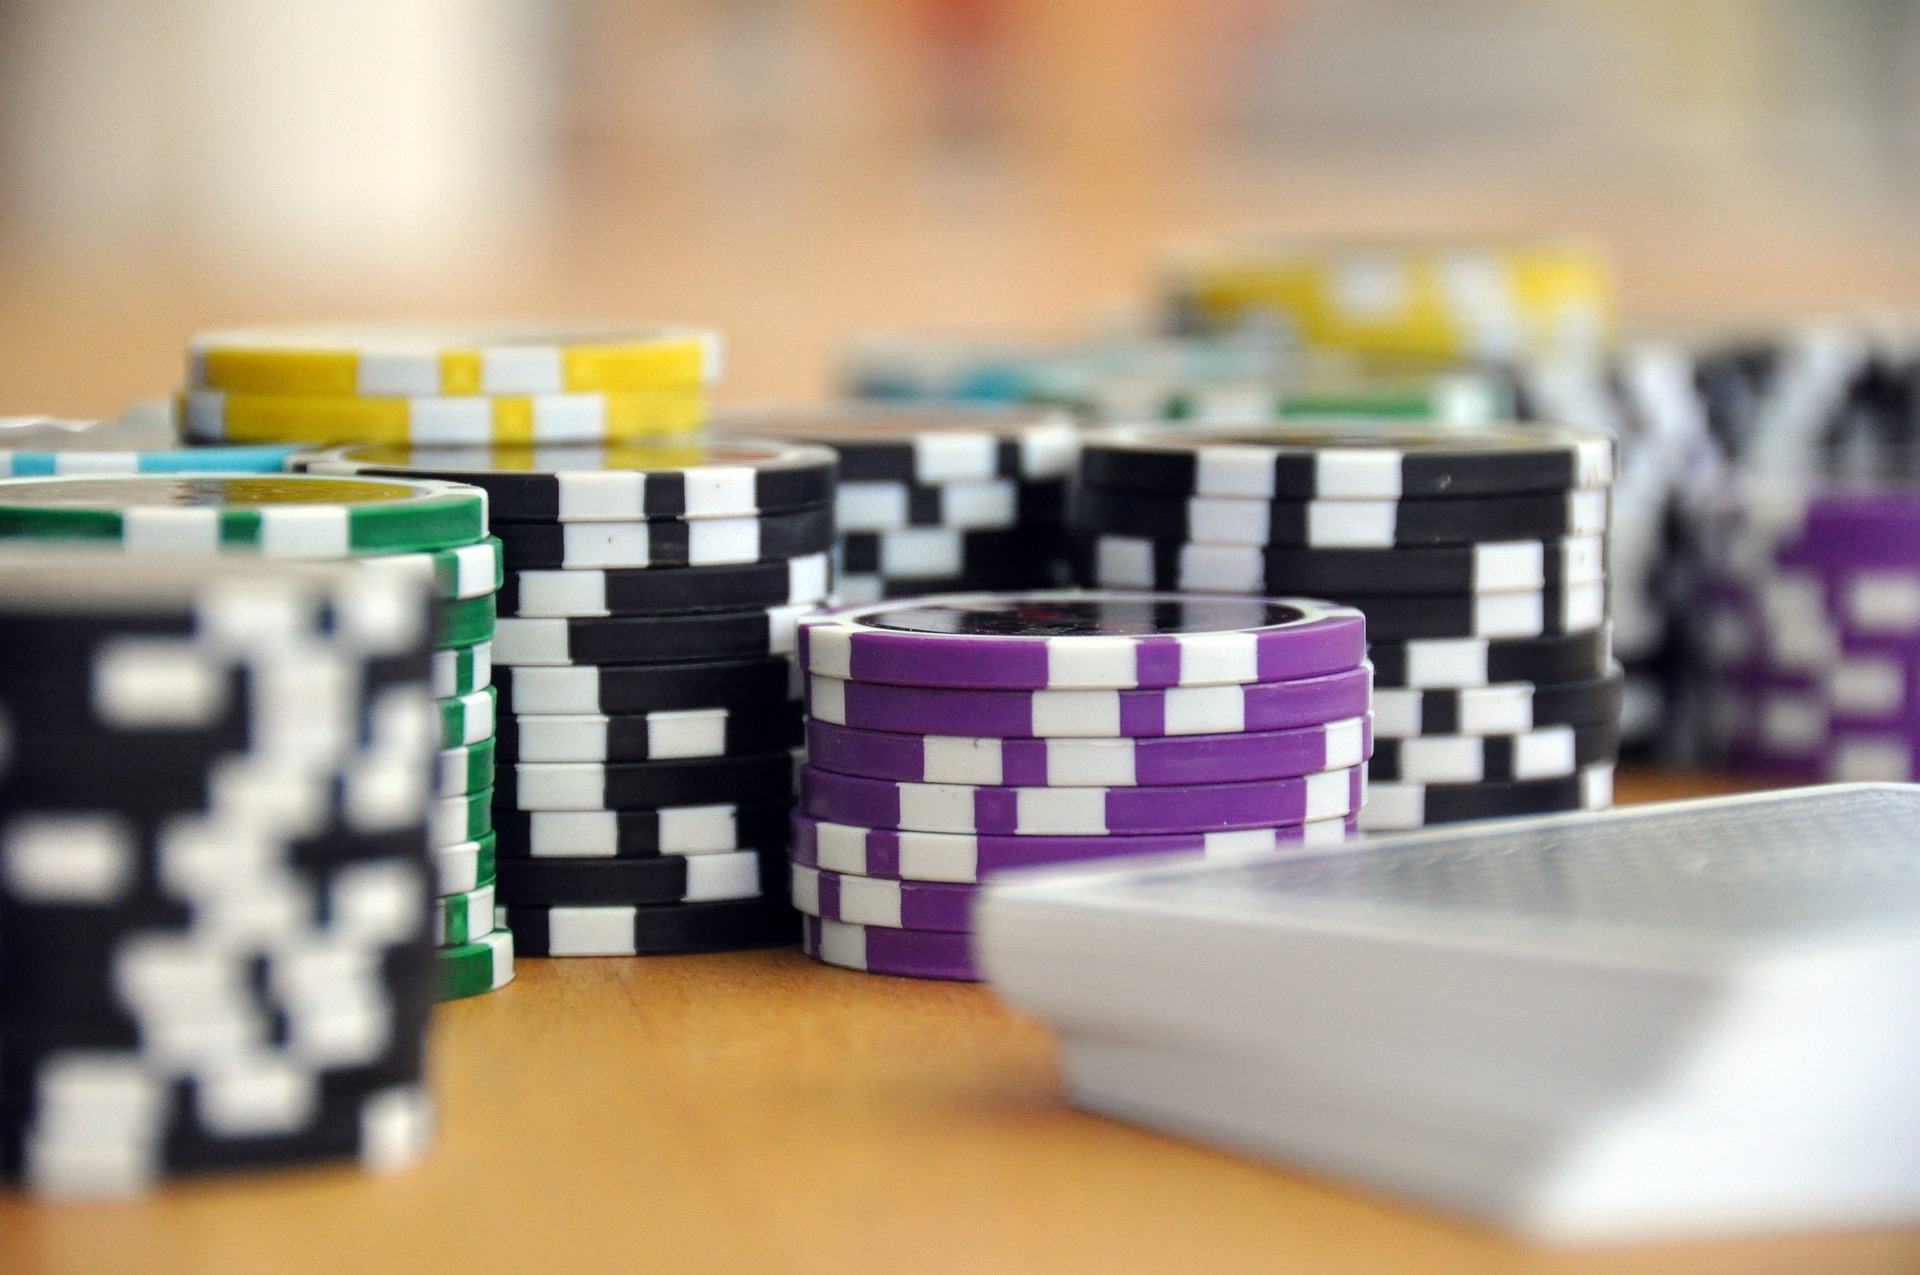  Online casinos are now accessible via mobile device.